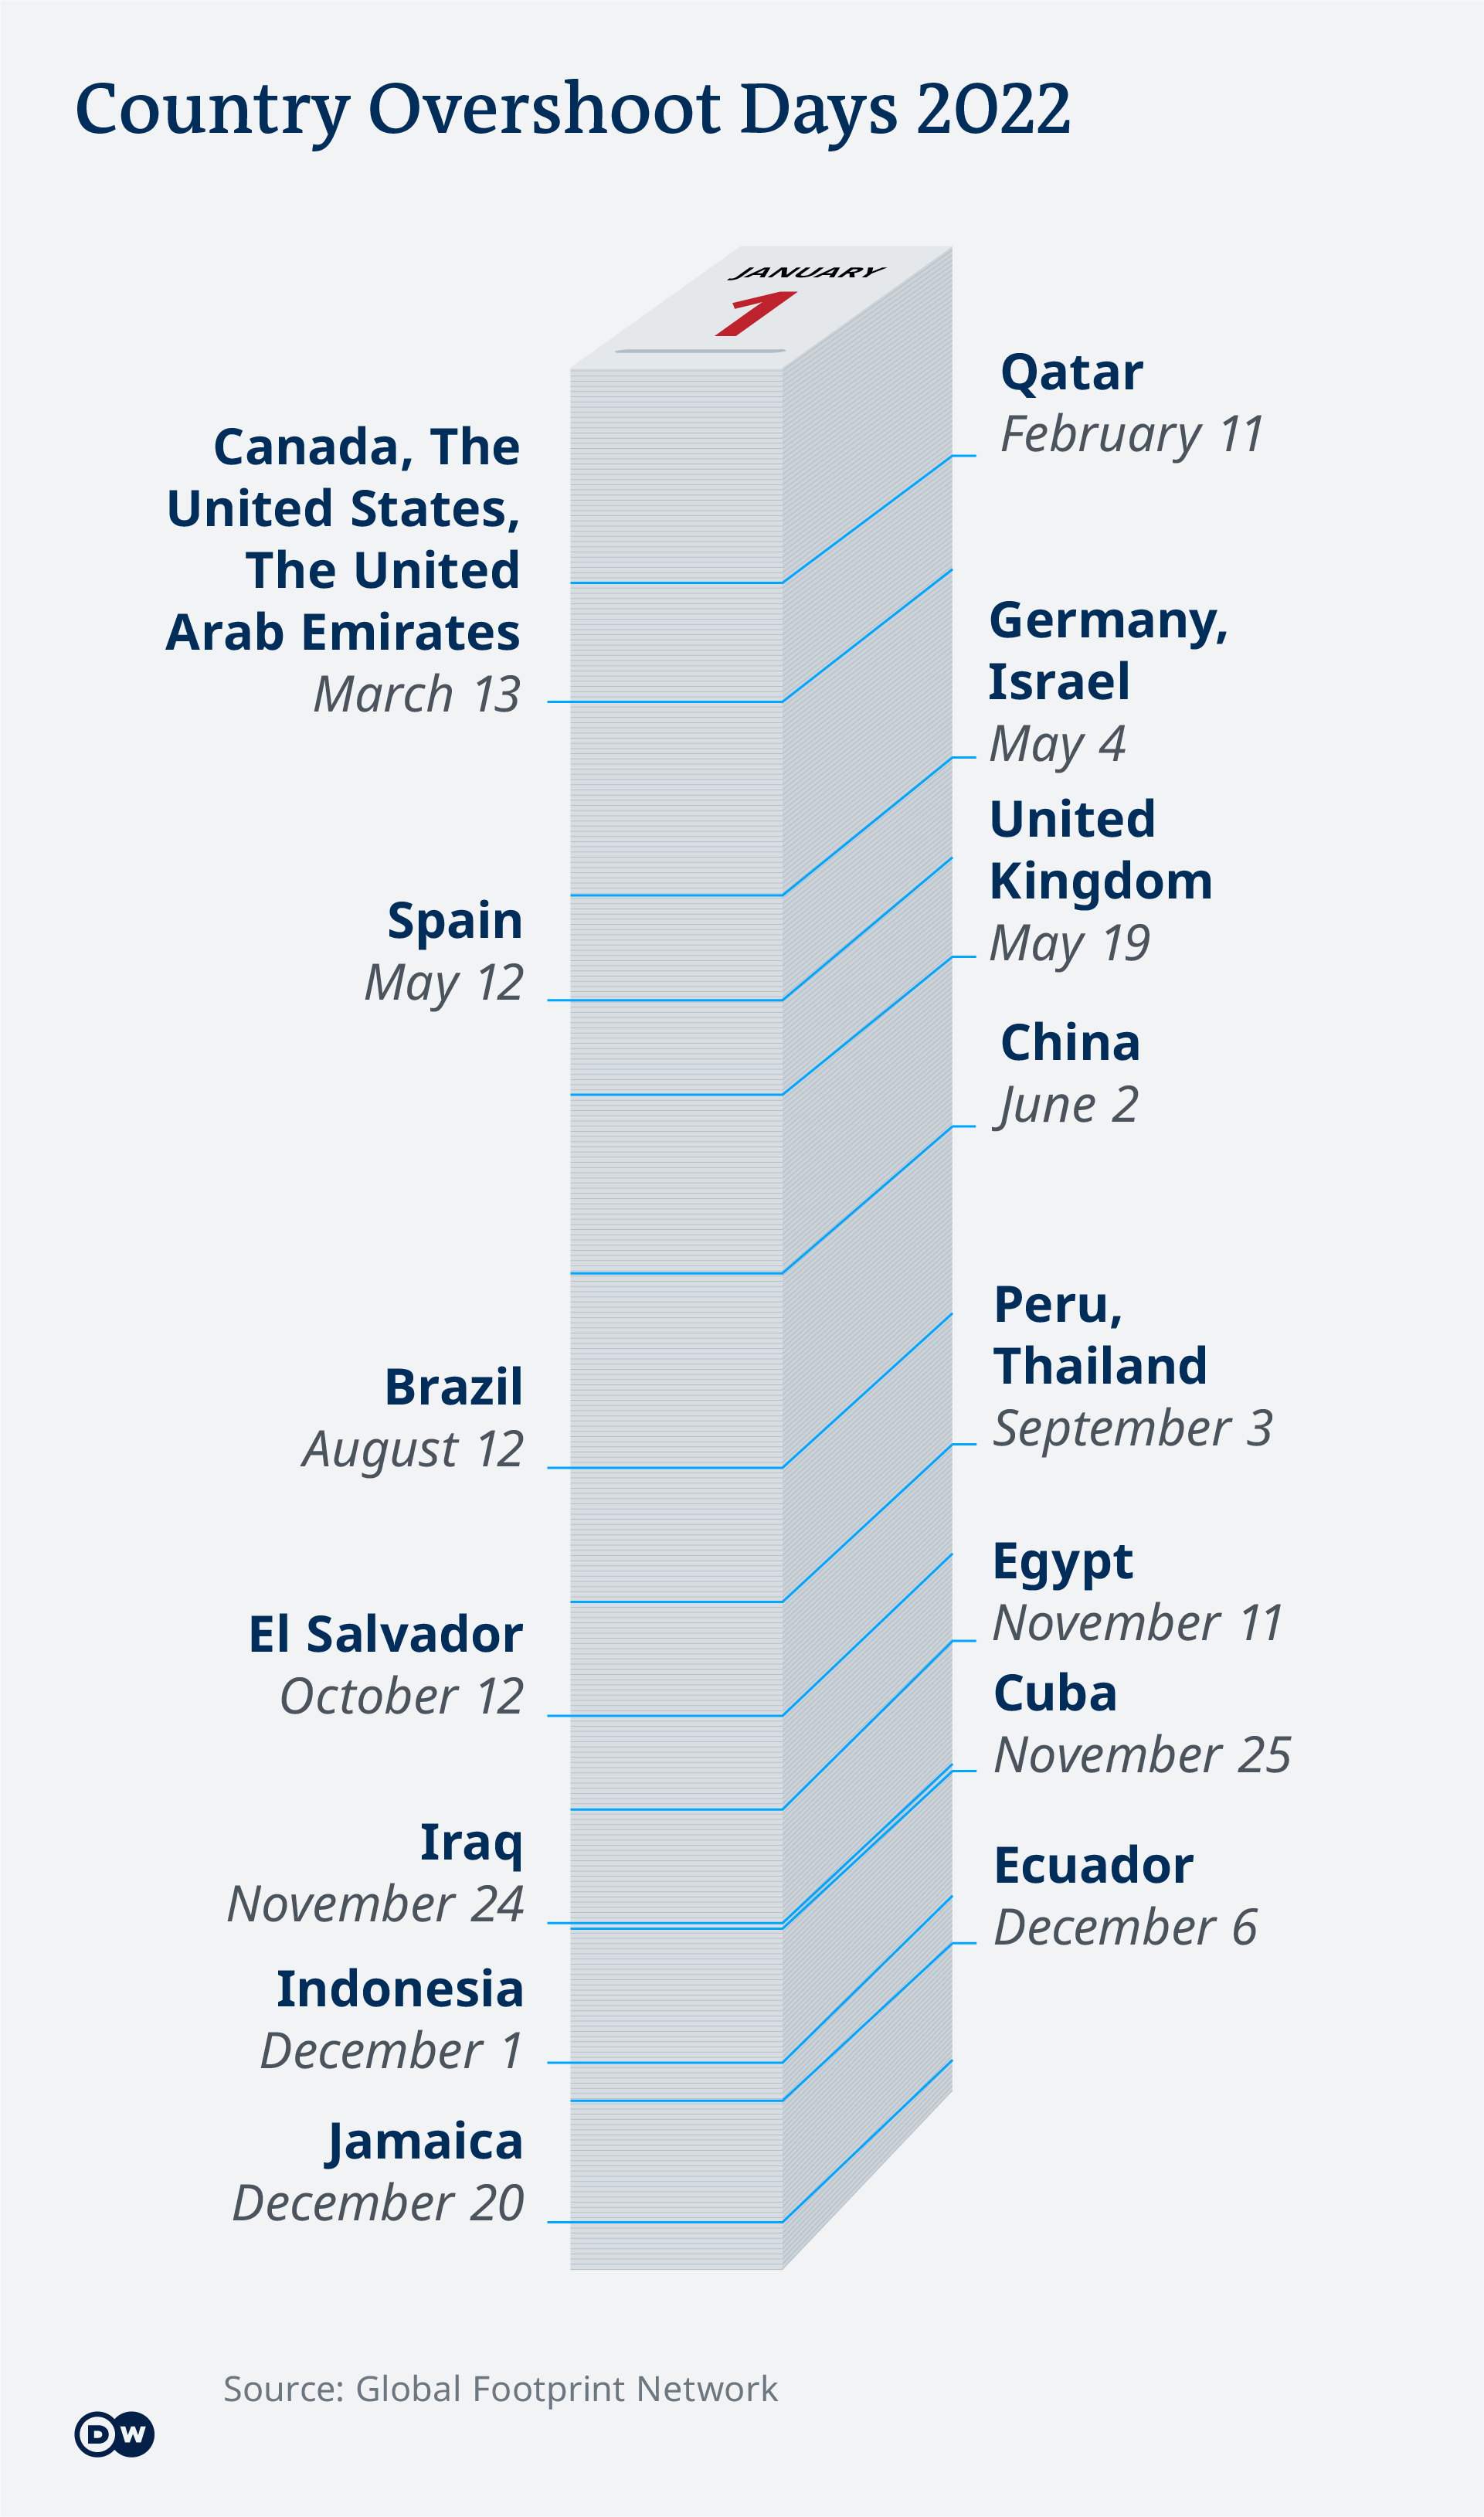 Info graphic showing which countries reach their Overshoot Day when